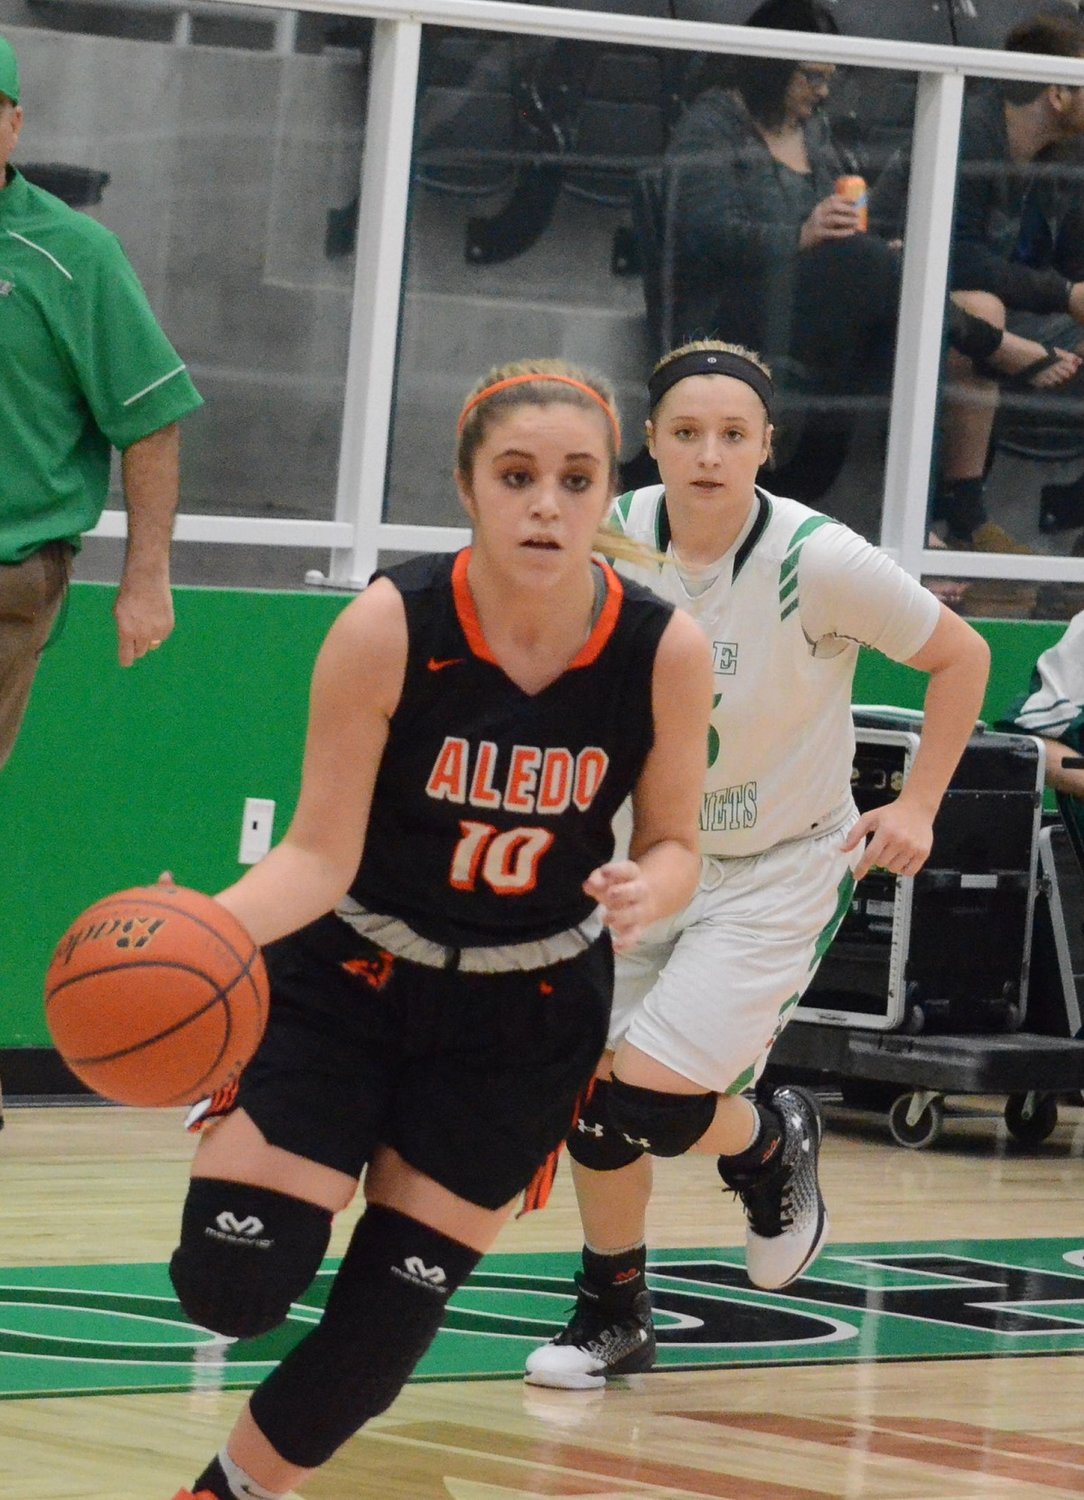 Aledo Ladycats freshman point guard Taylor Morgan (10) was voted as District 6-5A's Newcomer of the Year for the 2016-17 season.